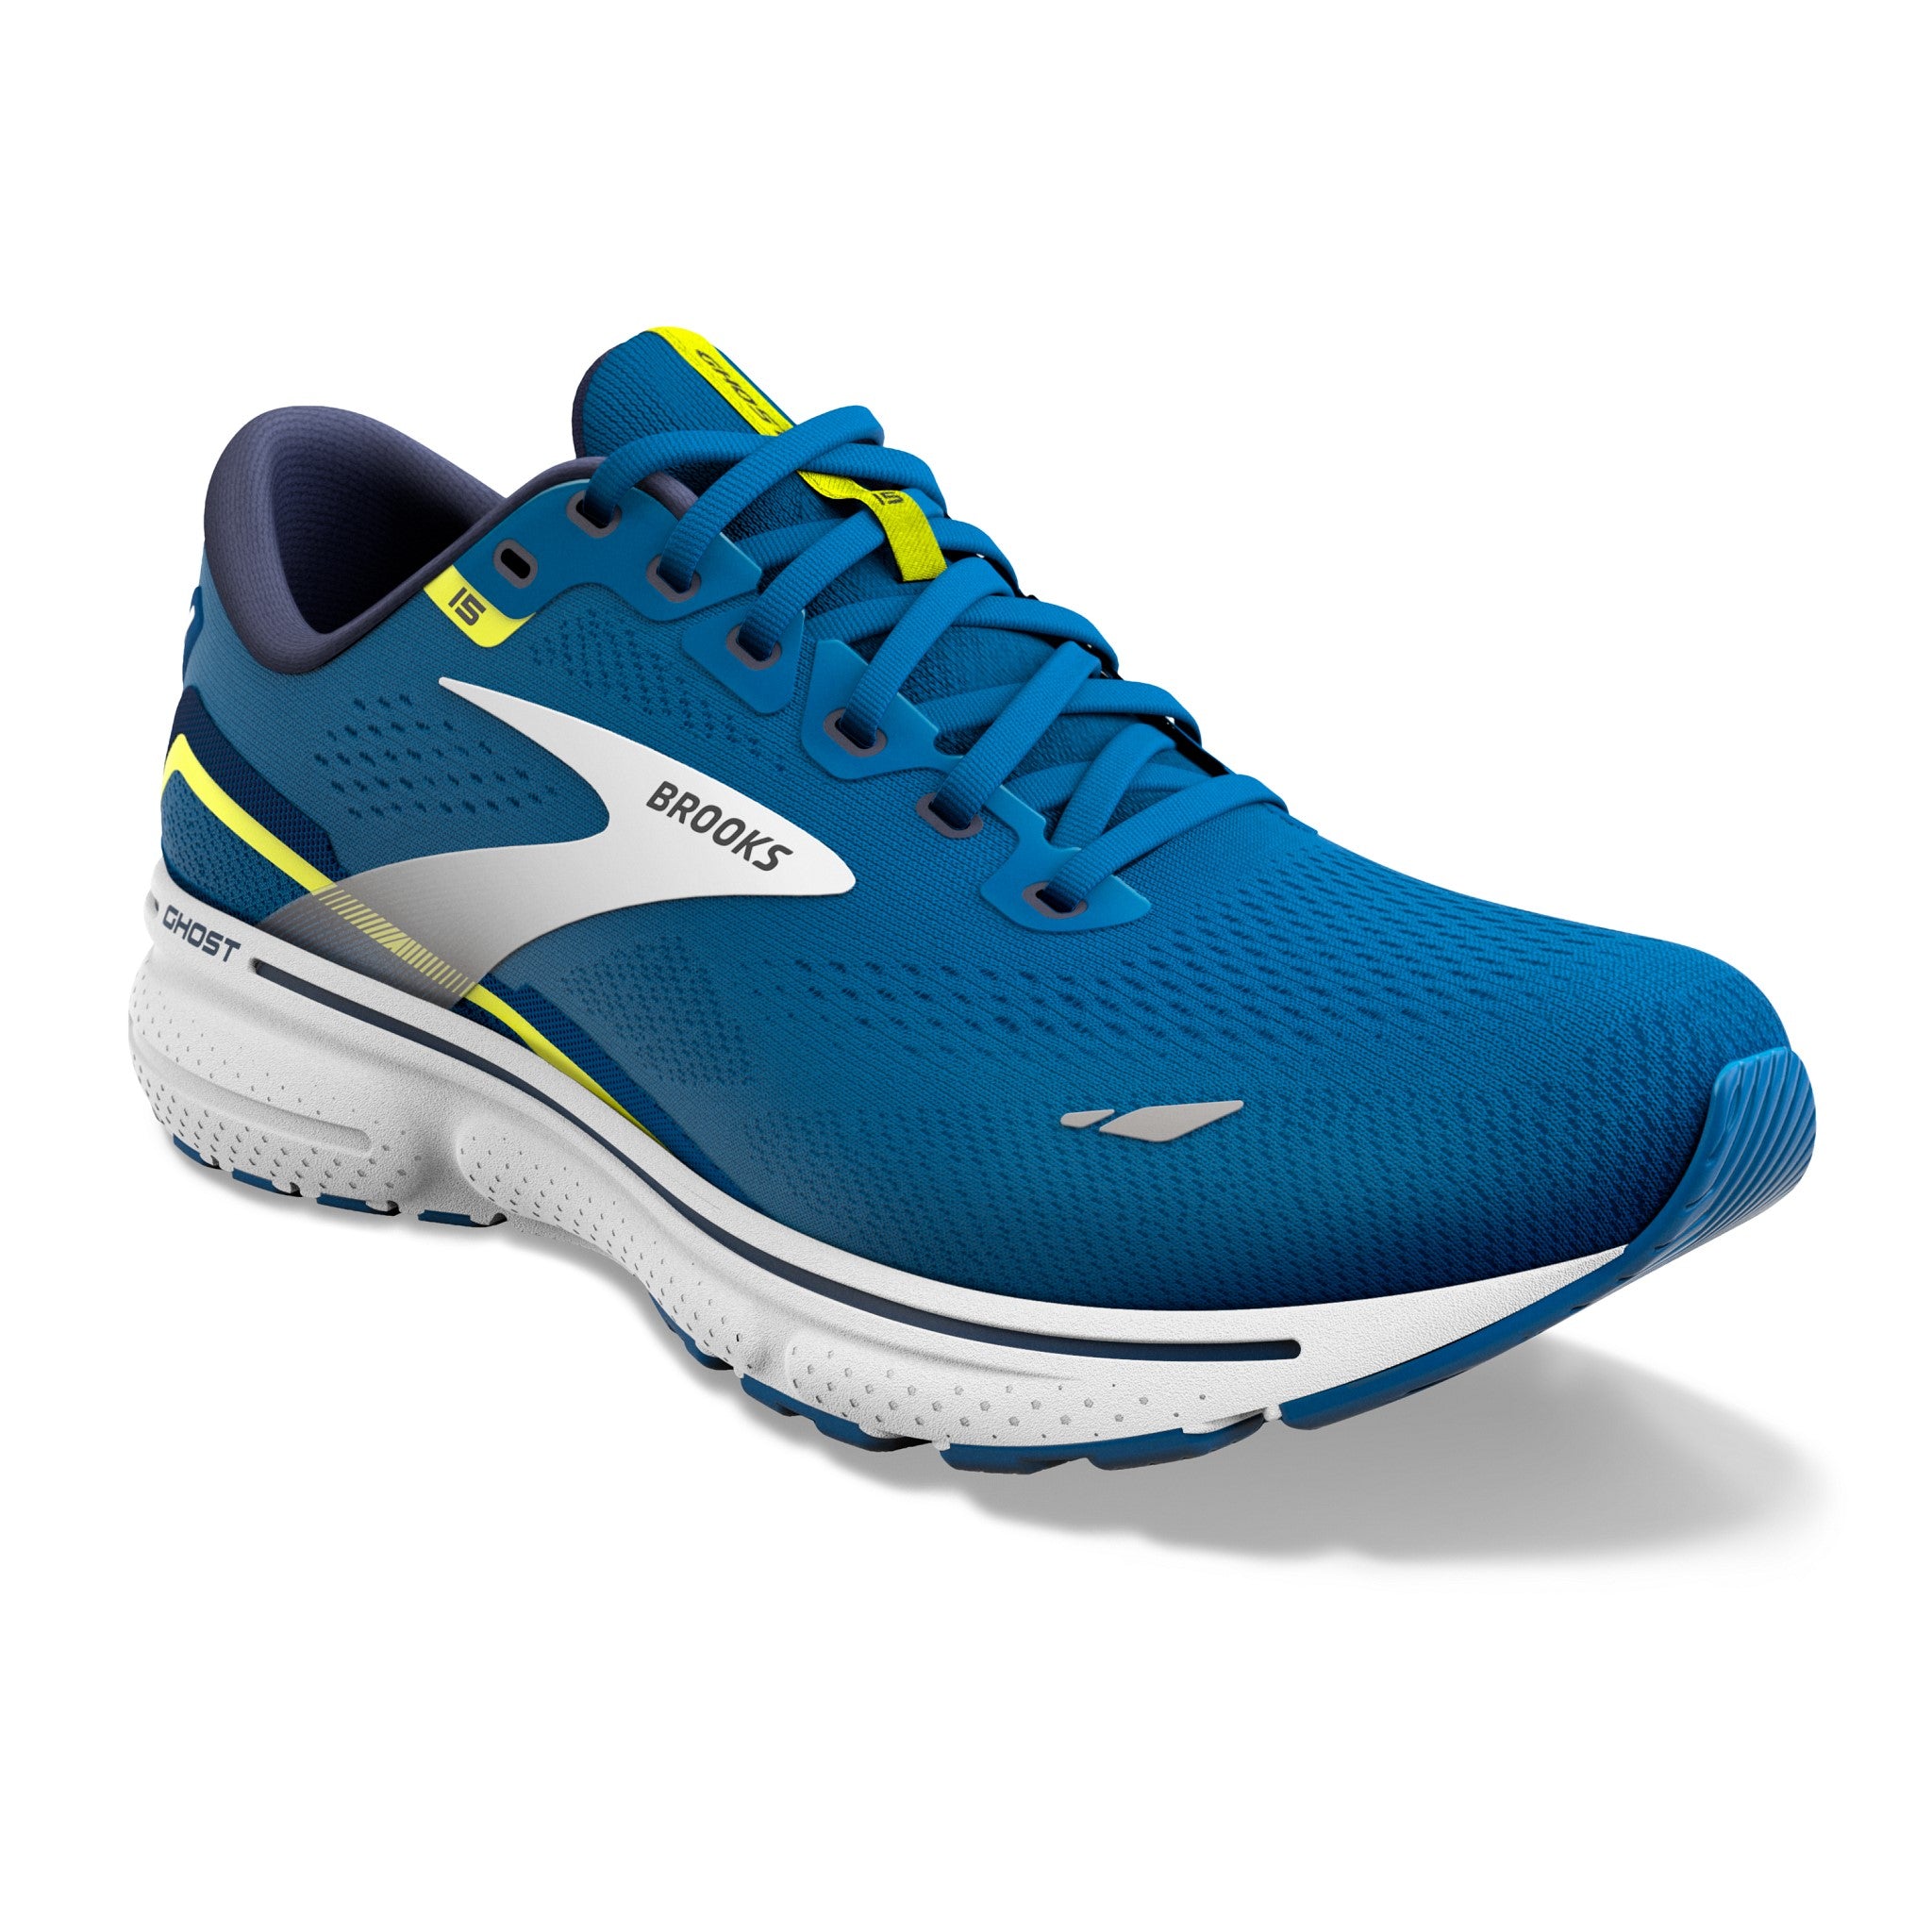 Men's Running Shoes neutral, support, stability, road and trail running ...